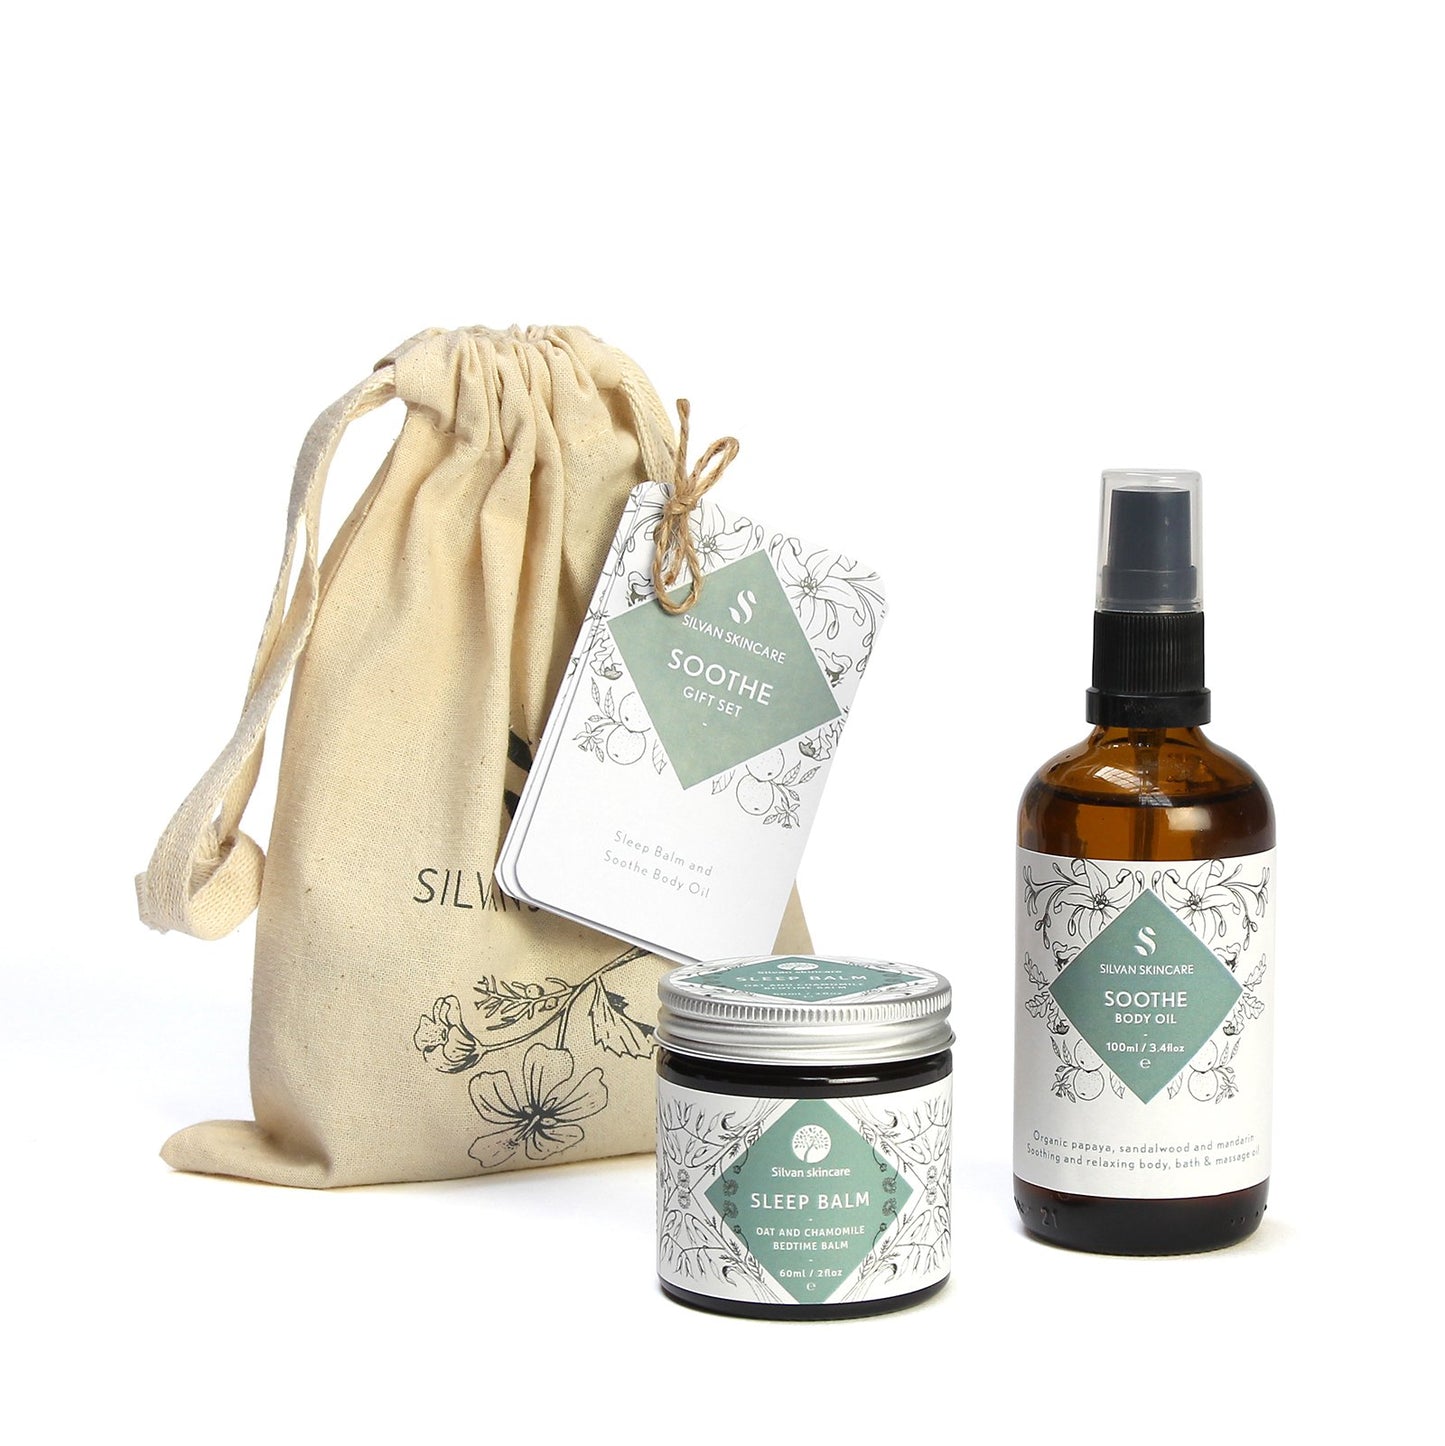 Soothe Gift Set